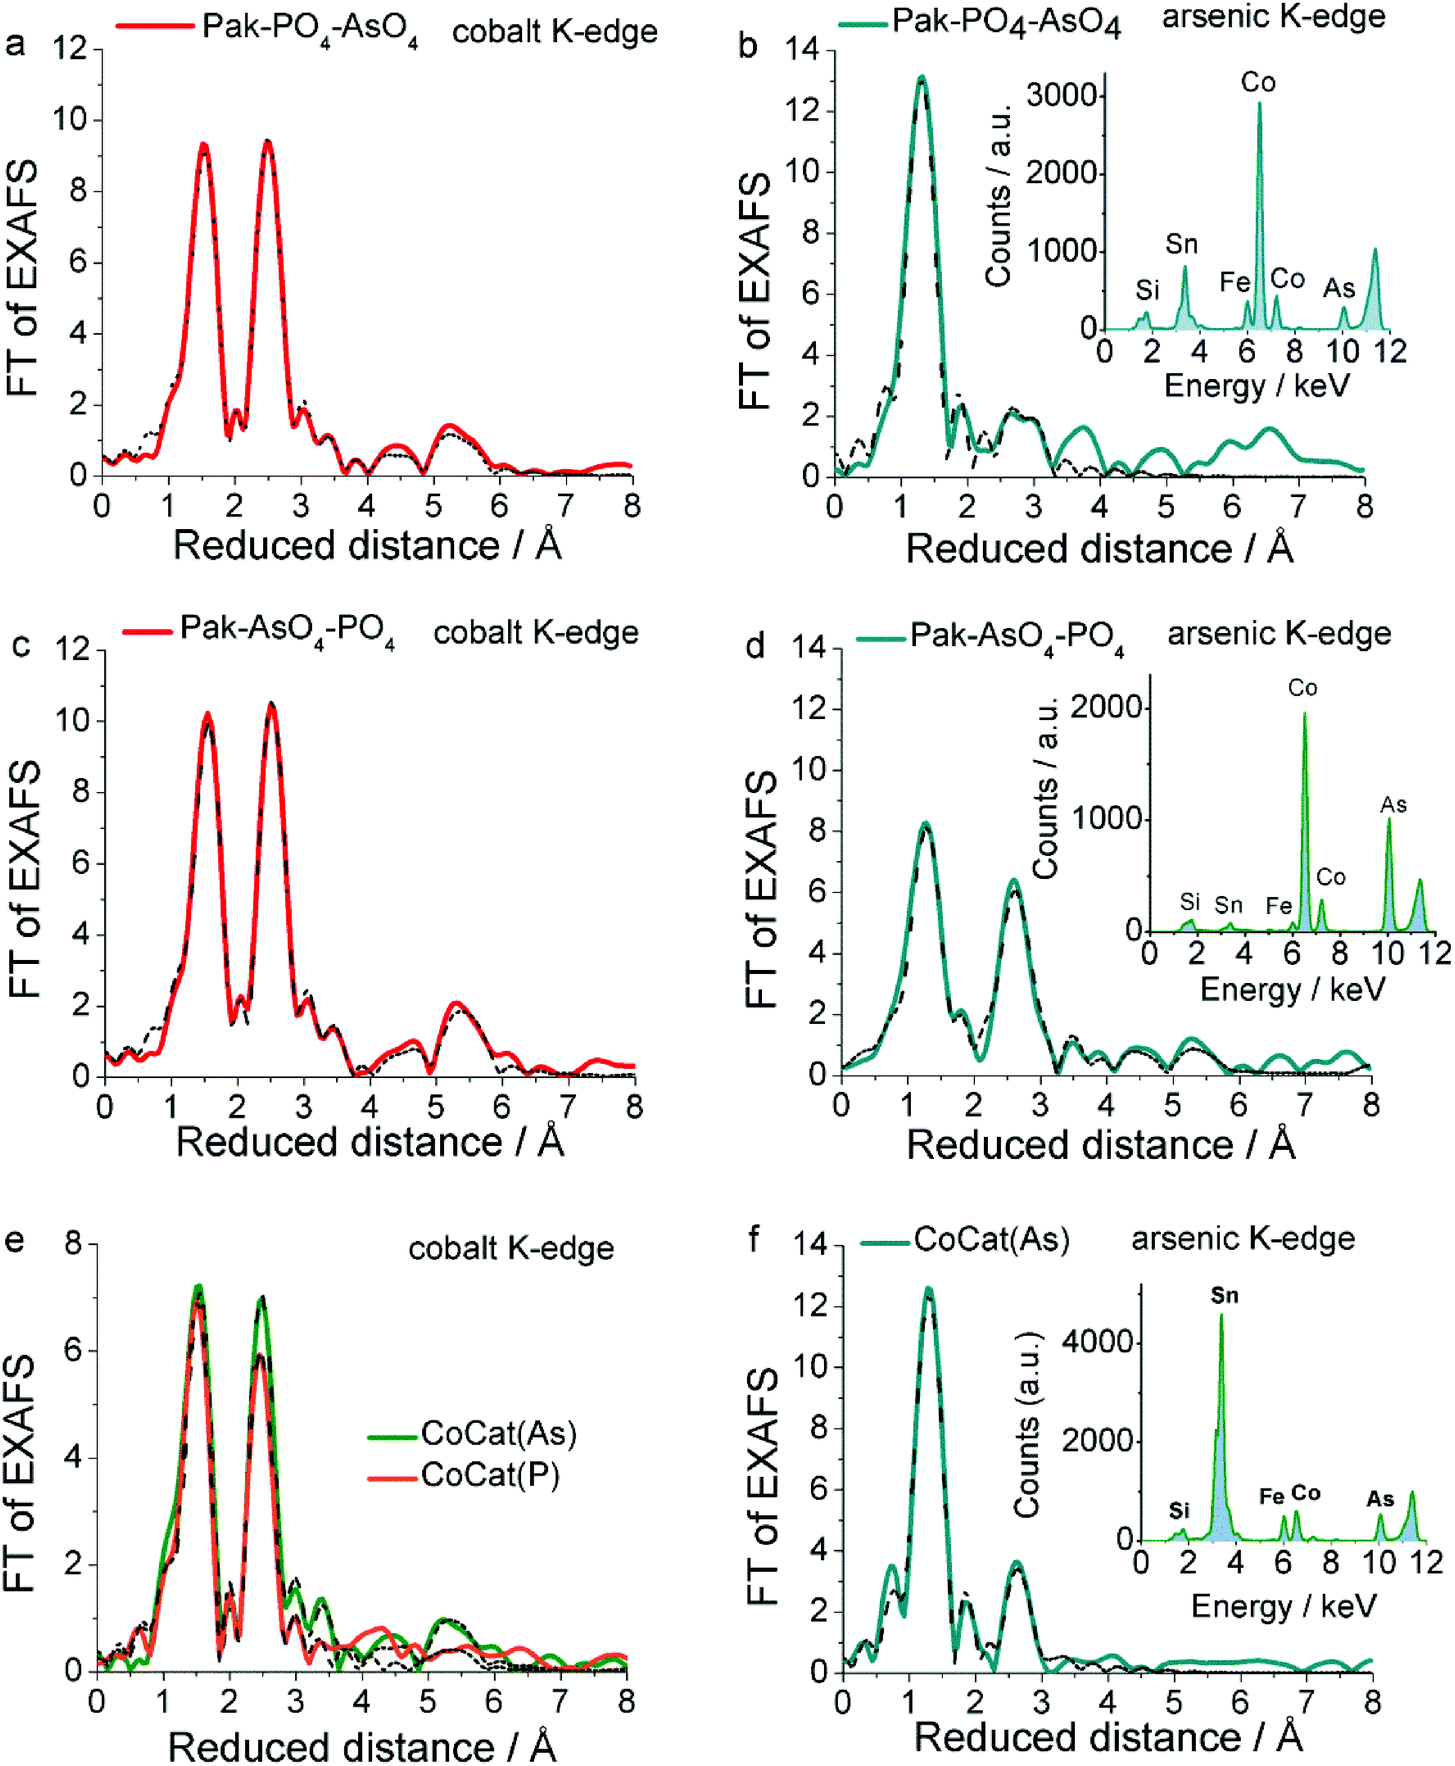 Structural And Functional Role Of Anions In Electrochemical Water Oxidation Probed By Arsenate Incorporation Into Cobalt Oxide Materials Physical Chemistry Chemical Physics Rsc Publishing